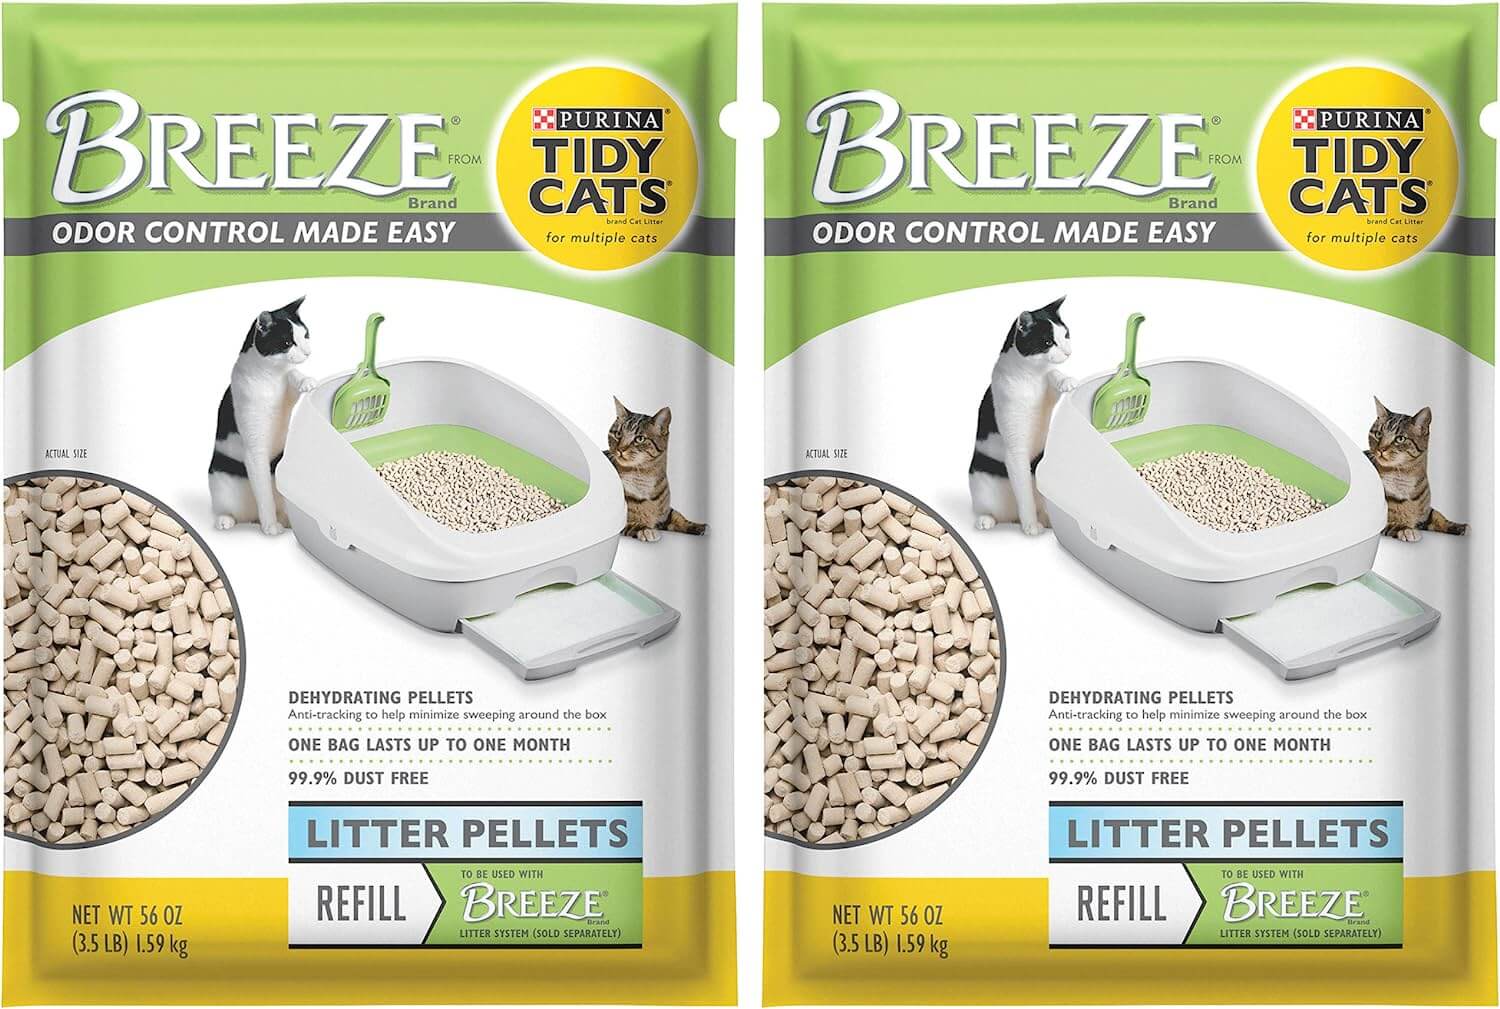 Purina Tidy Cats Breeze Litter Pellets Refill for Tidy Cats System